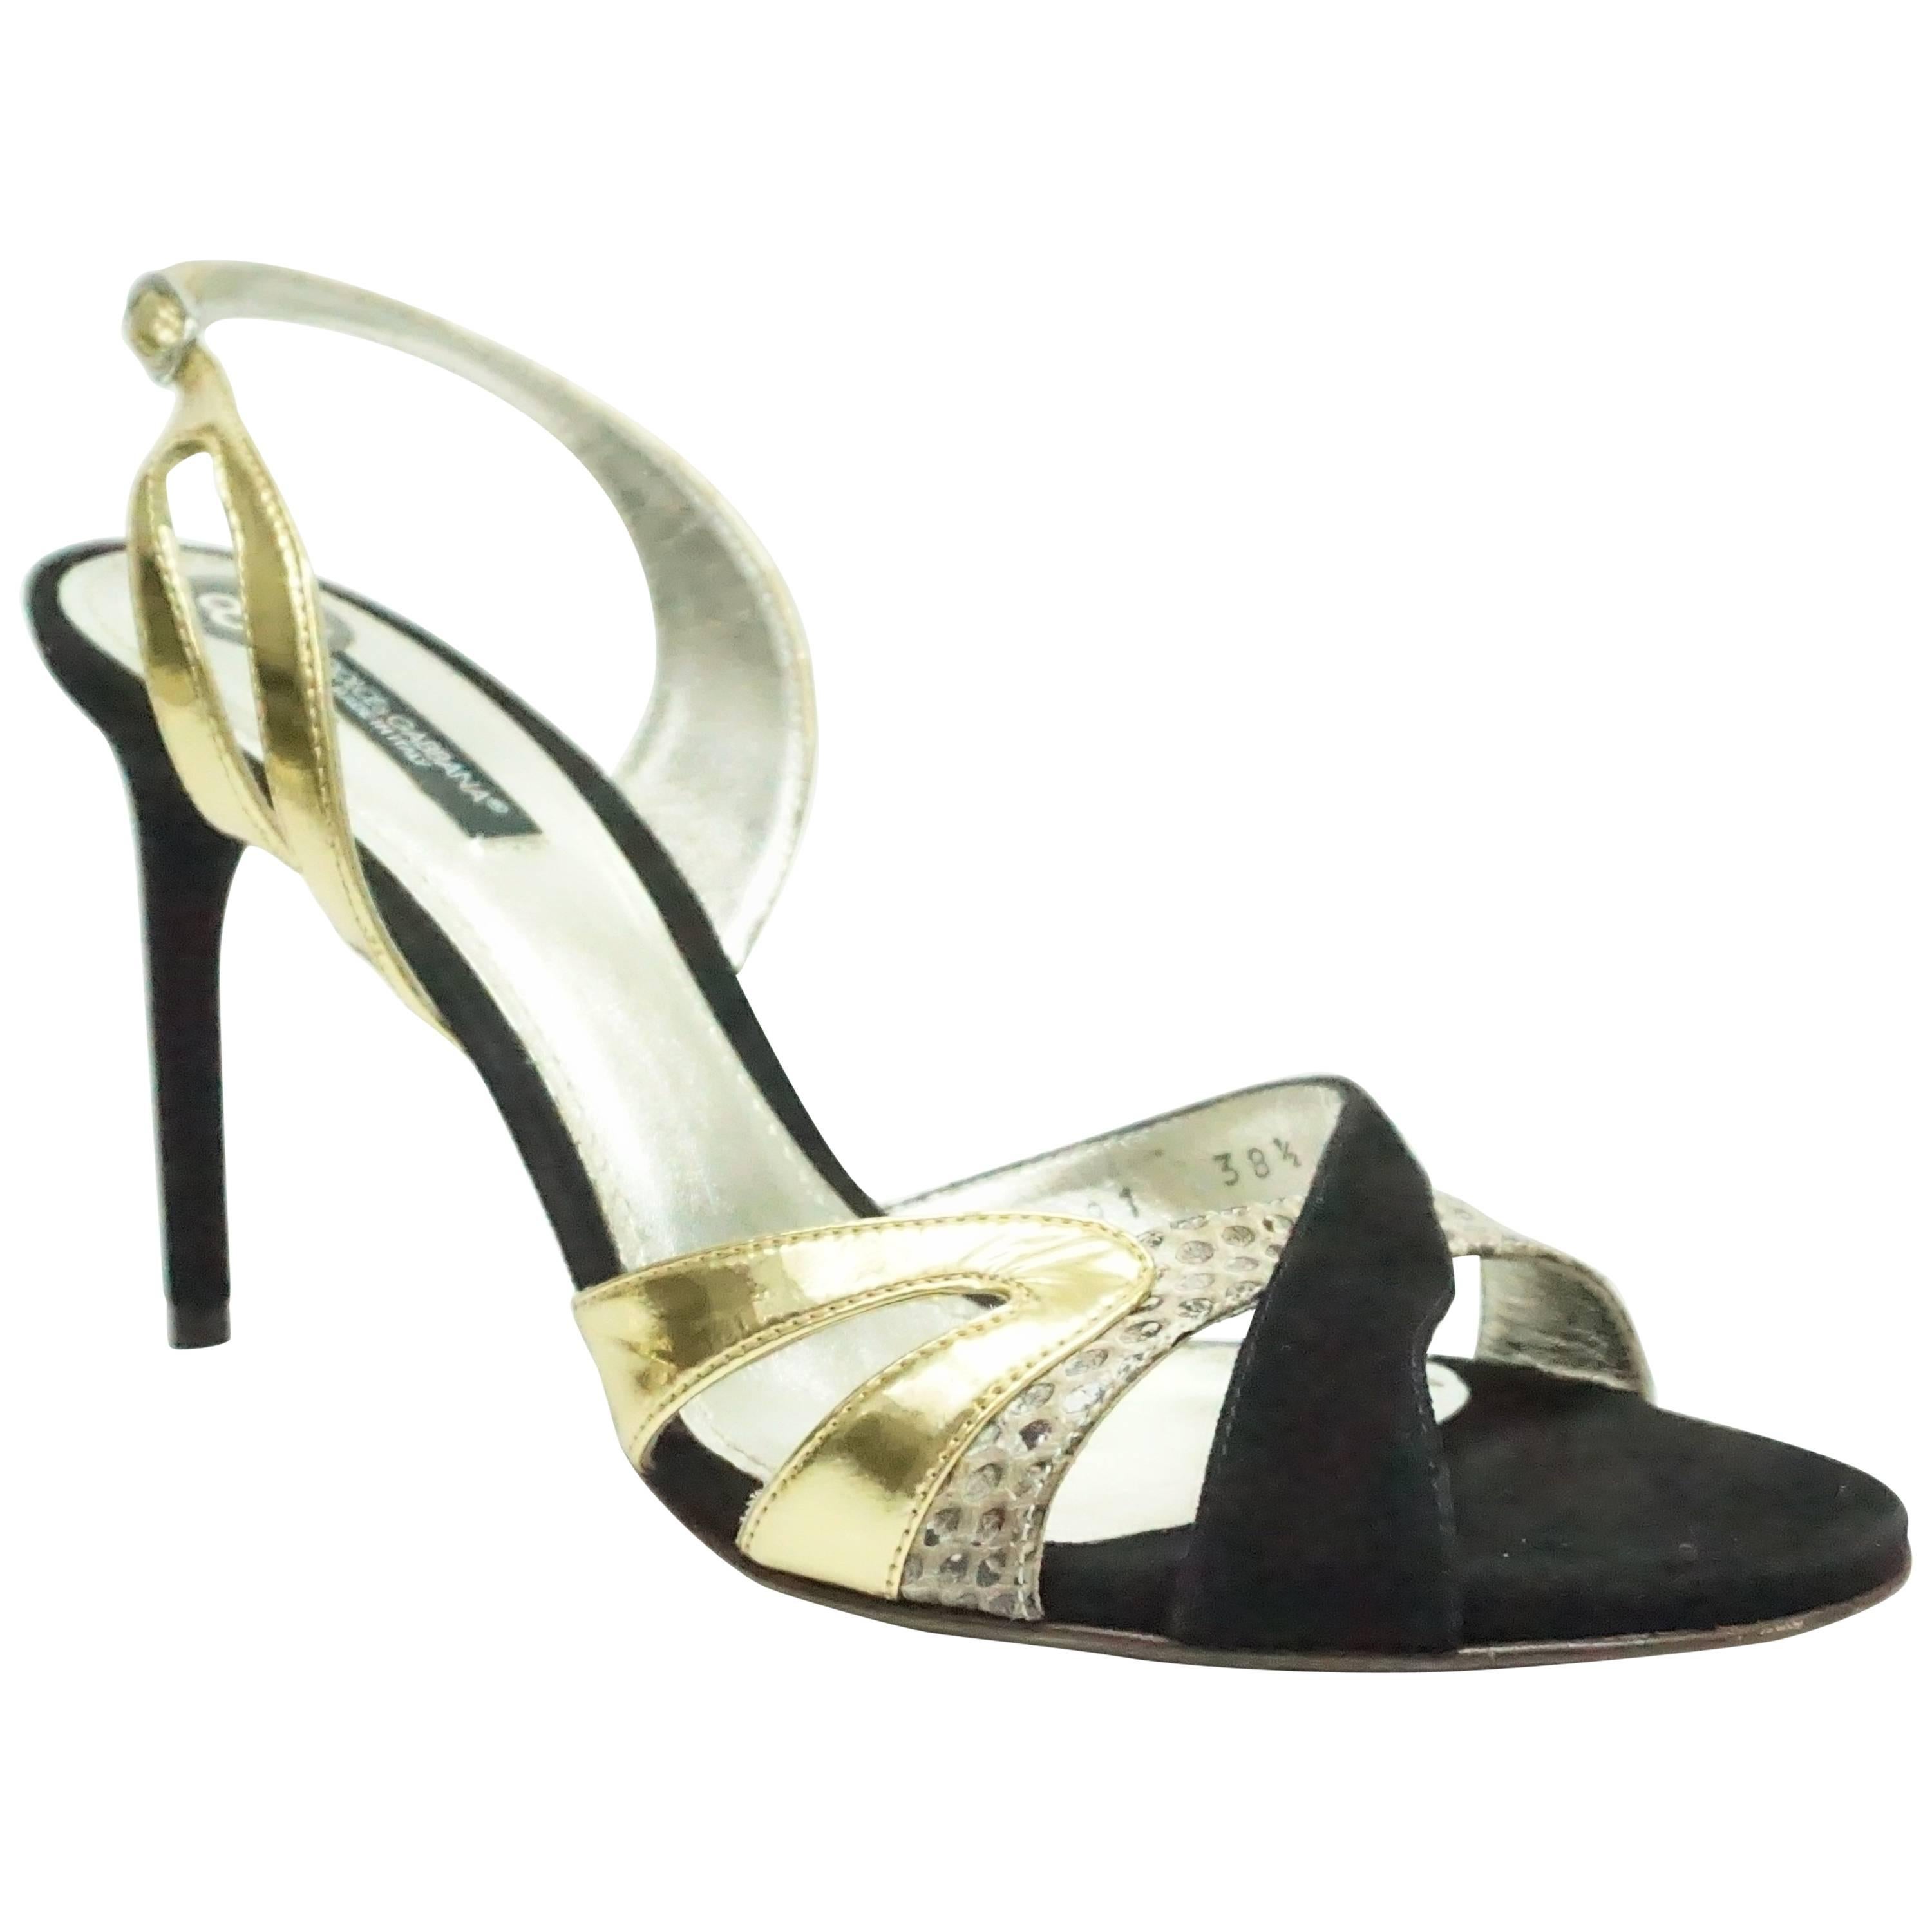 Dolce & Gabbana Black Suede Slingback w/ Gold Leather and Snakeskin - 38.5  For Sale